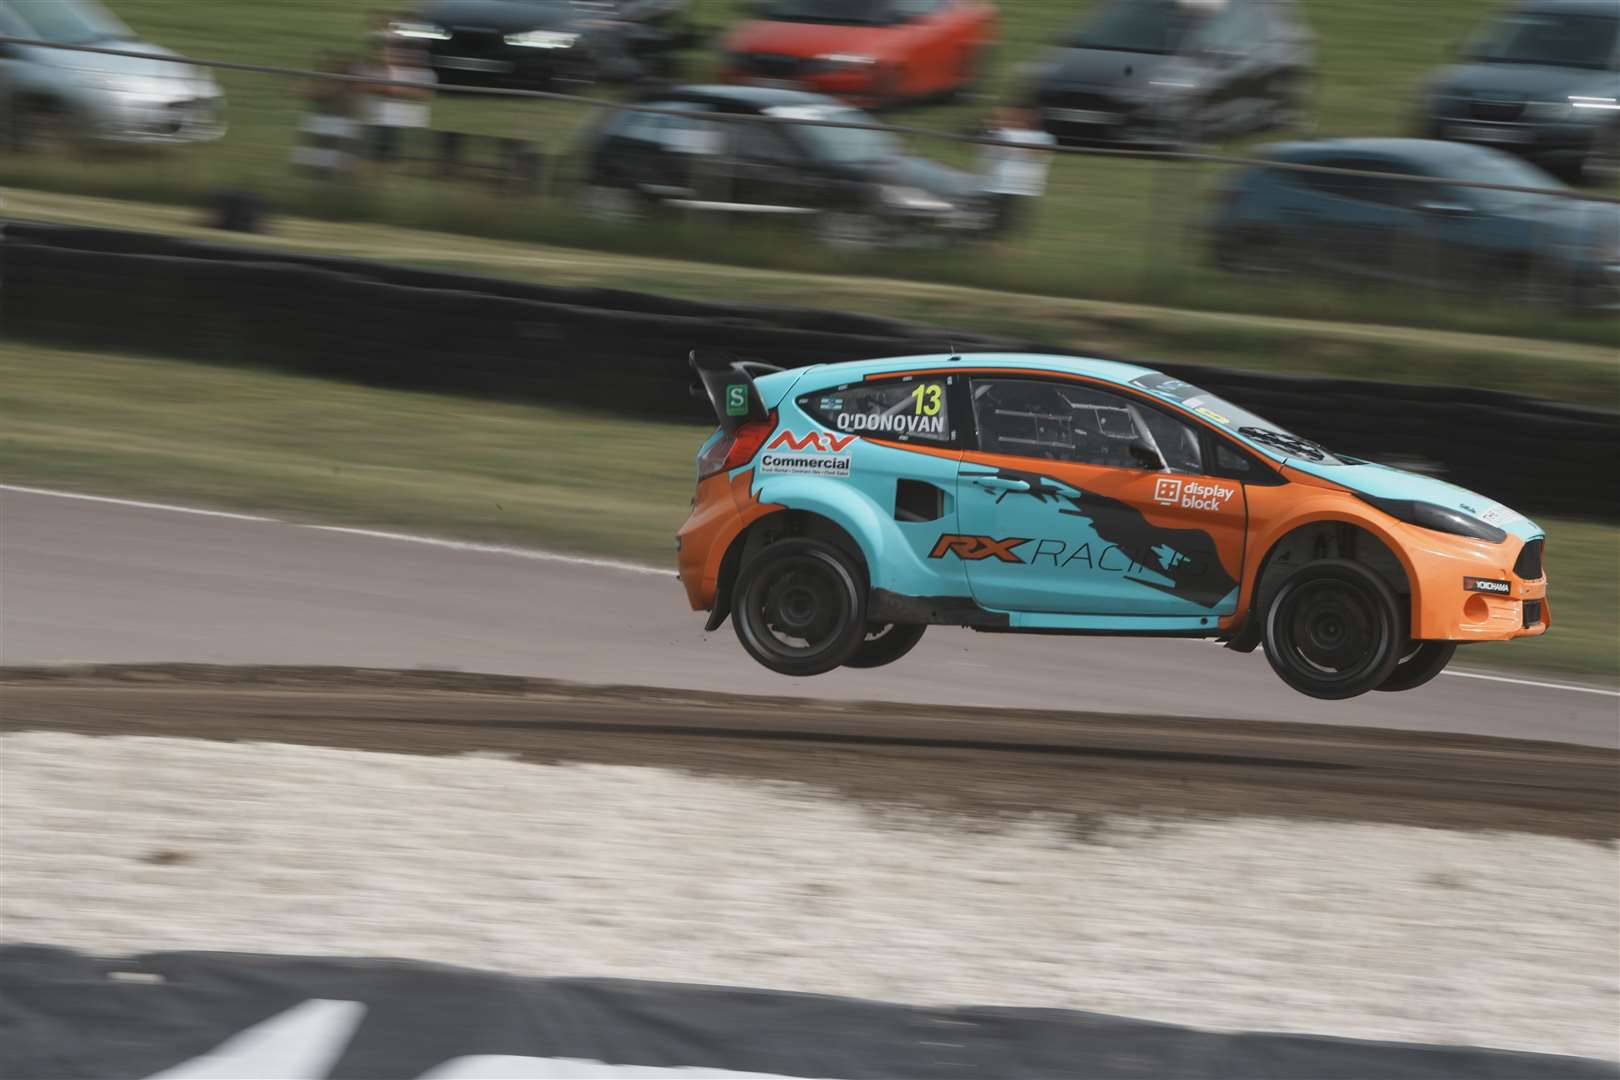 Ford Fiesta racer Patrick O'Donovan, 18, finished third in the Supercar category last weekend; Adisham's Tristan Ovenden (Citroen DS3) was fourth. O'Donovan hurt his back over the jump in pre-event testing. Picture: Nitro Rallycross